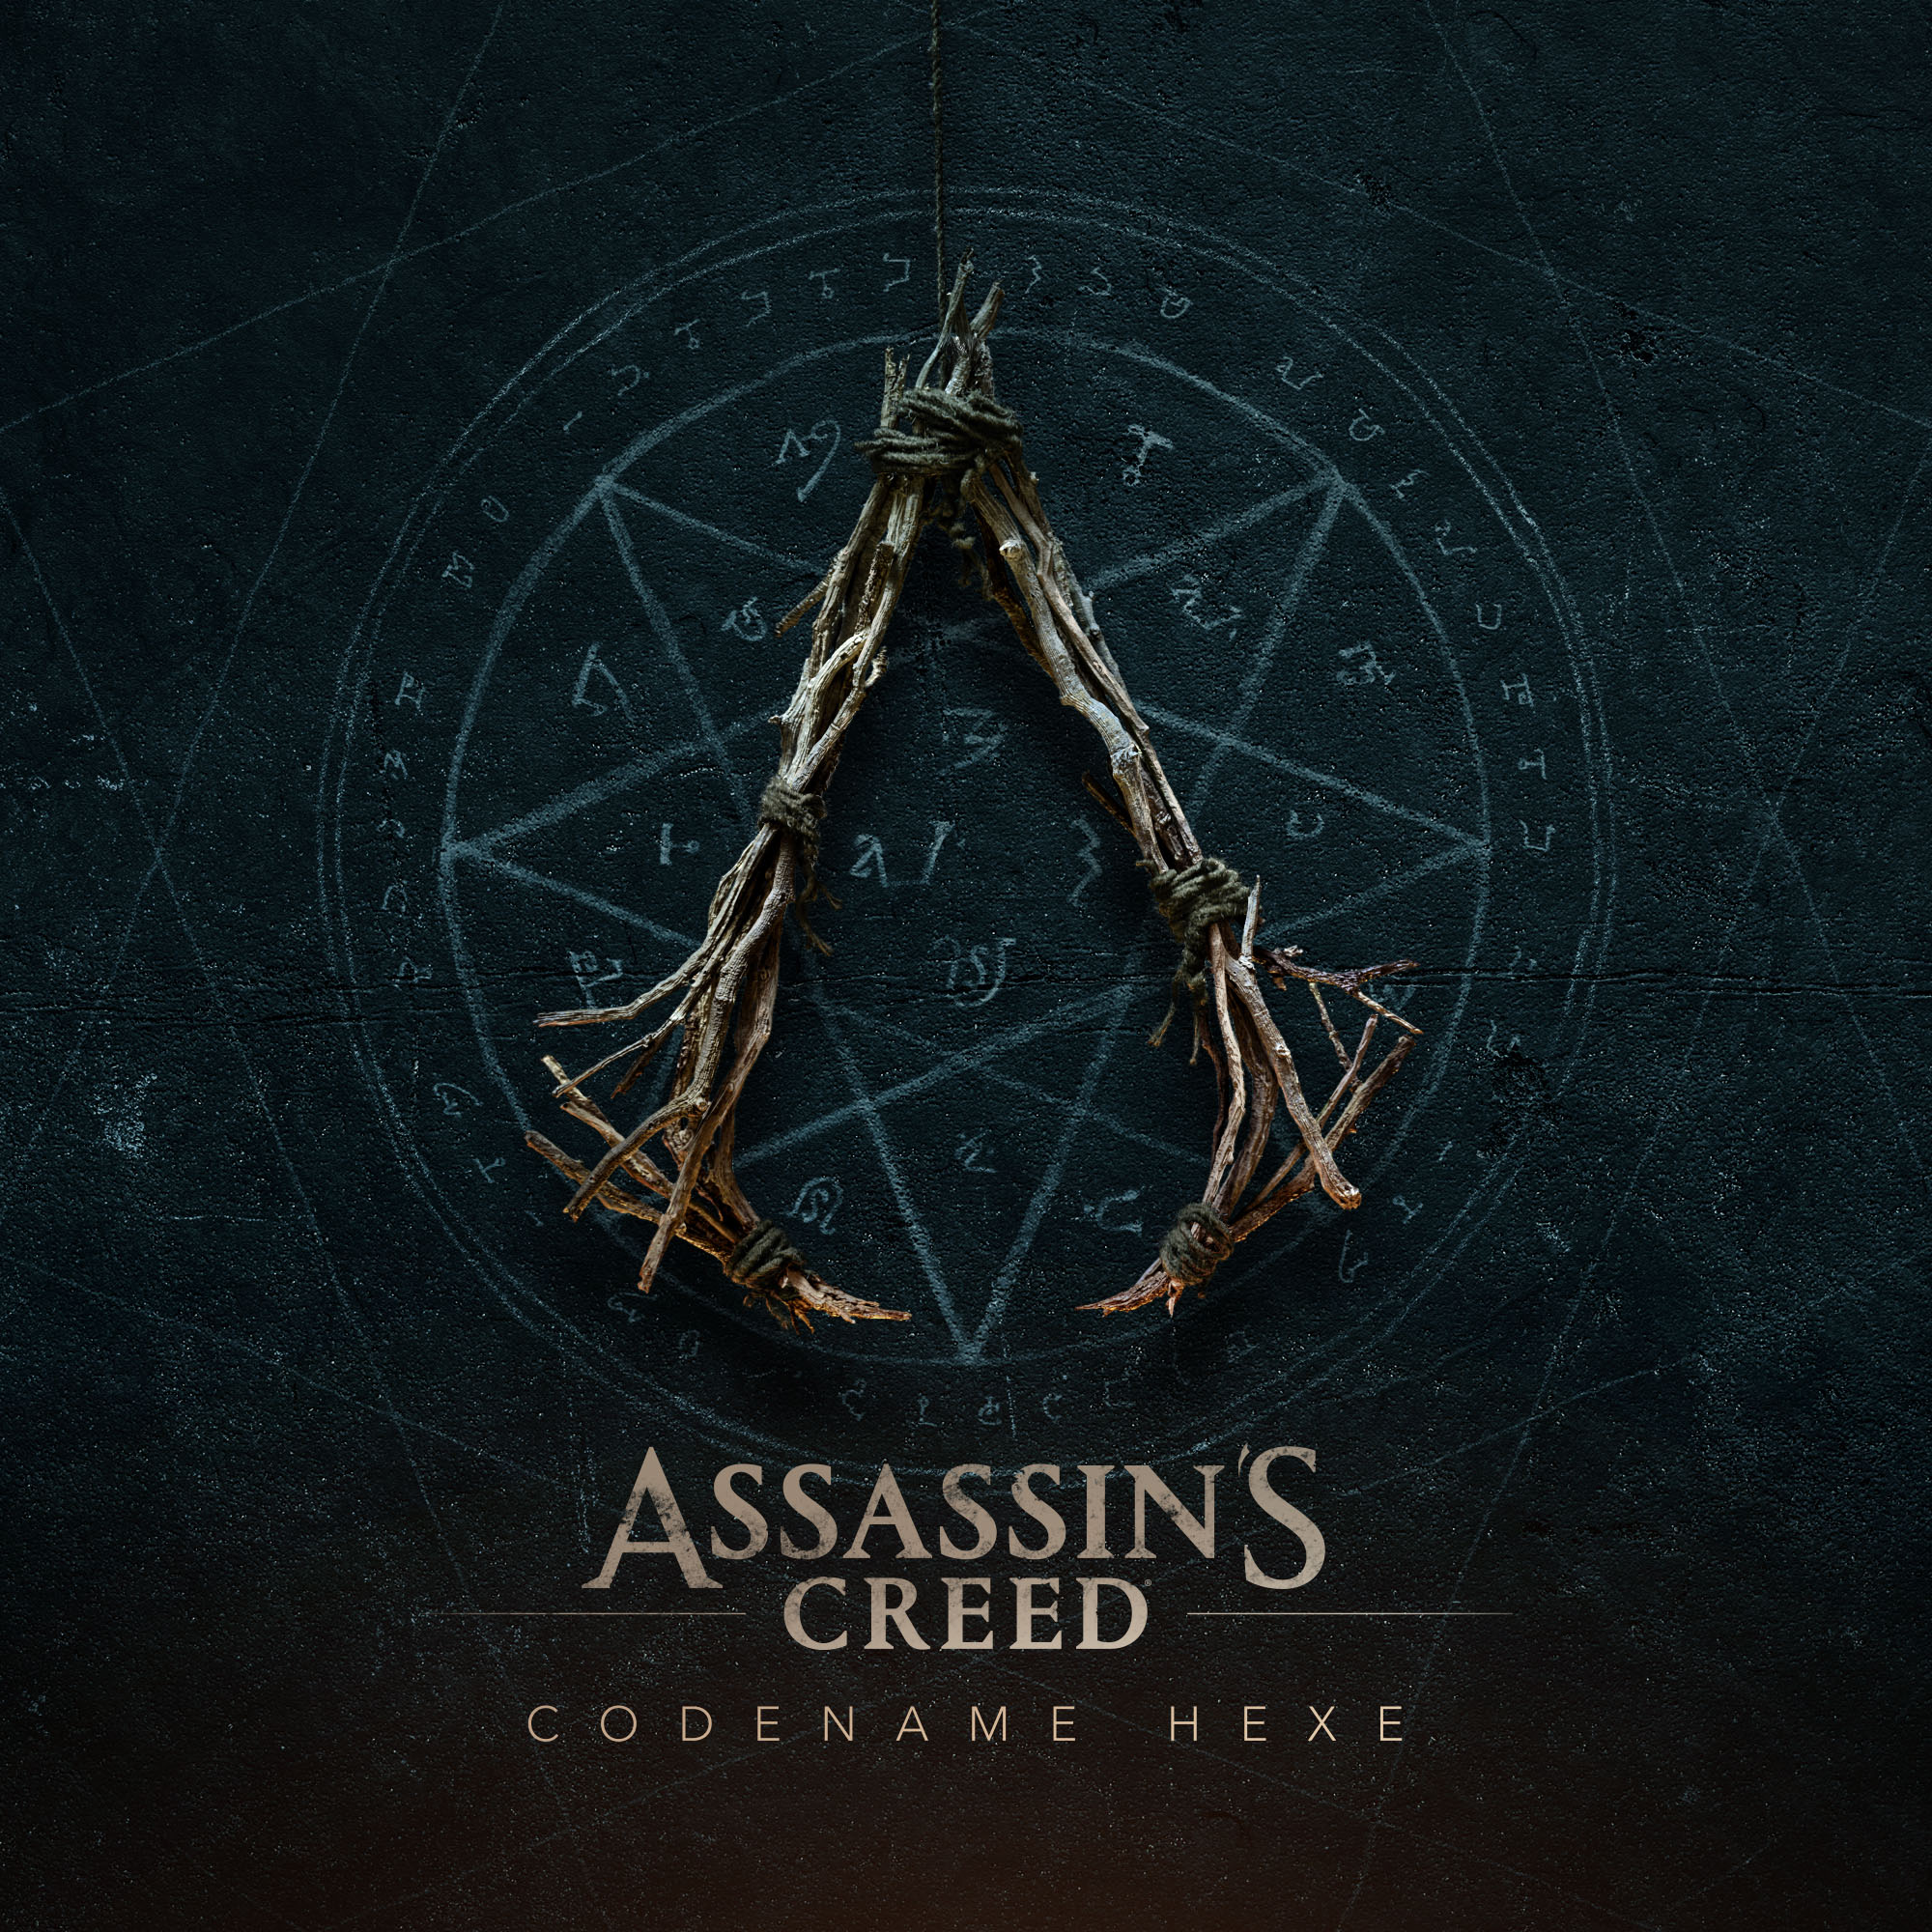 The logo for Assassin's Creed Hexe.